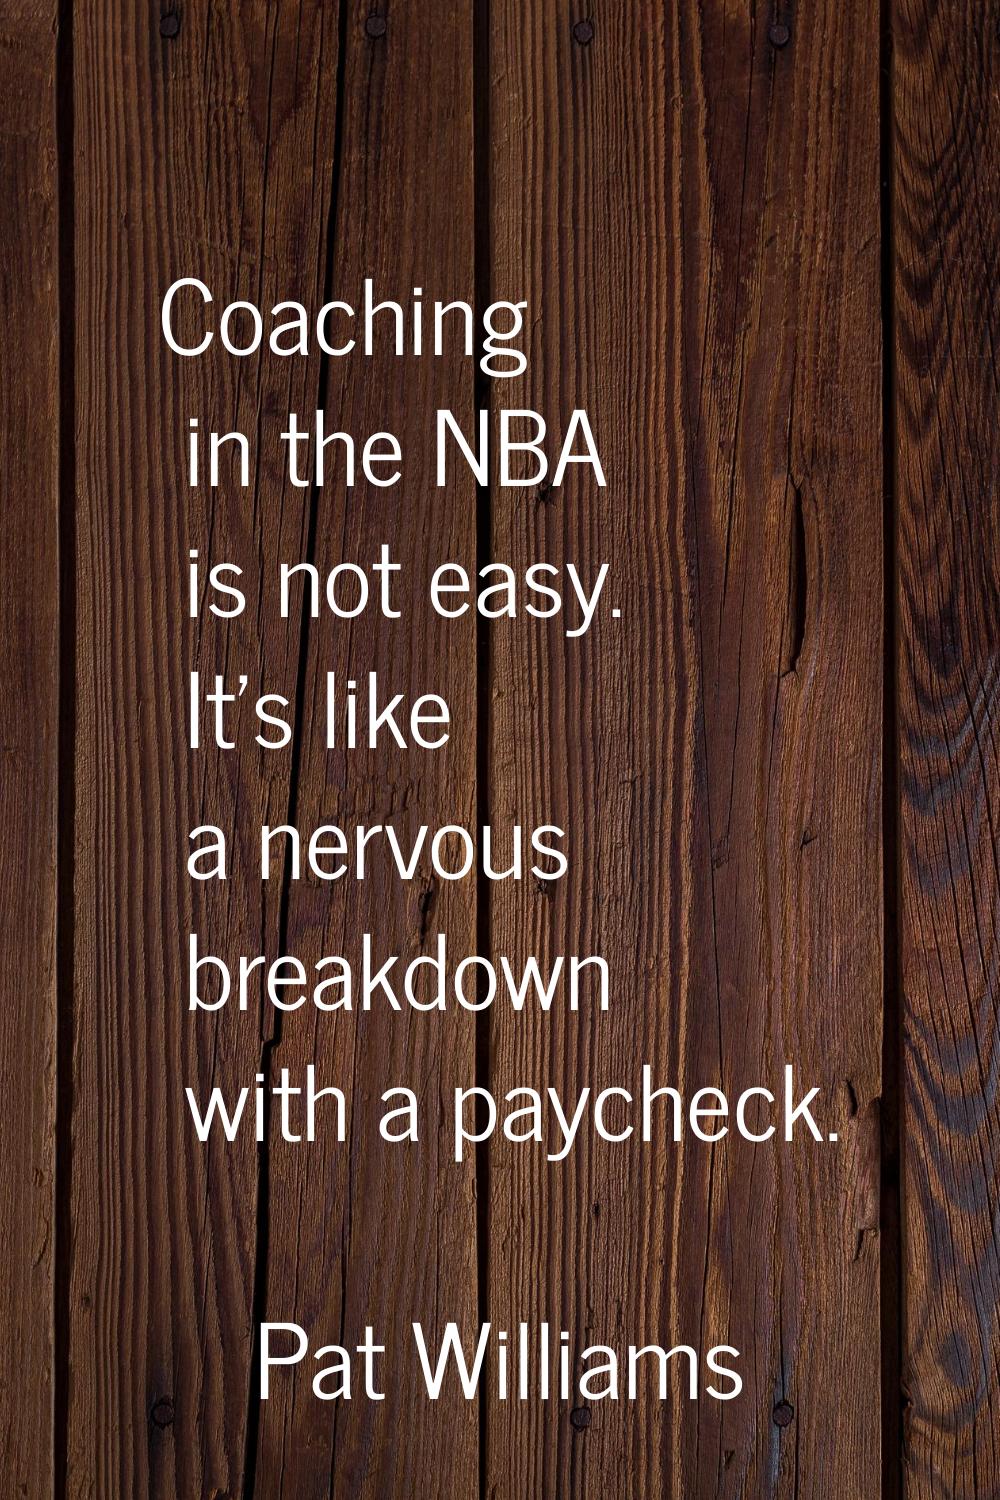 Coaching in the NBA is not easy. It's like a nervous breakdown with a paycheck.